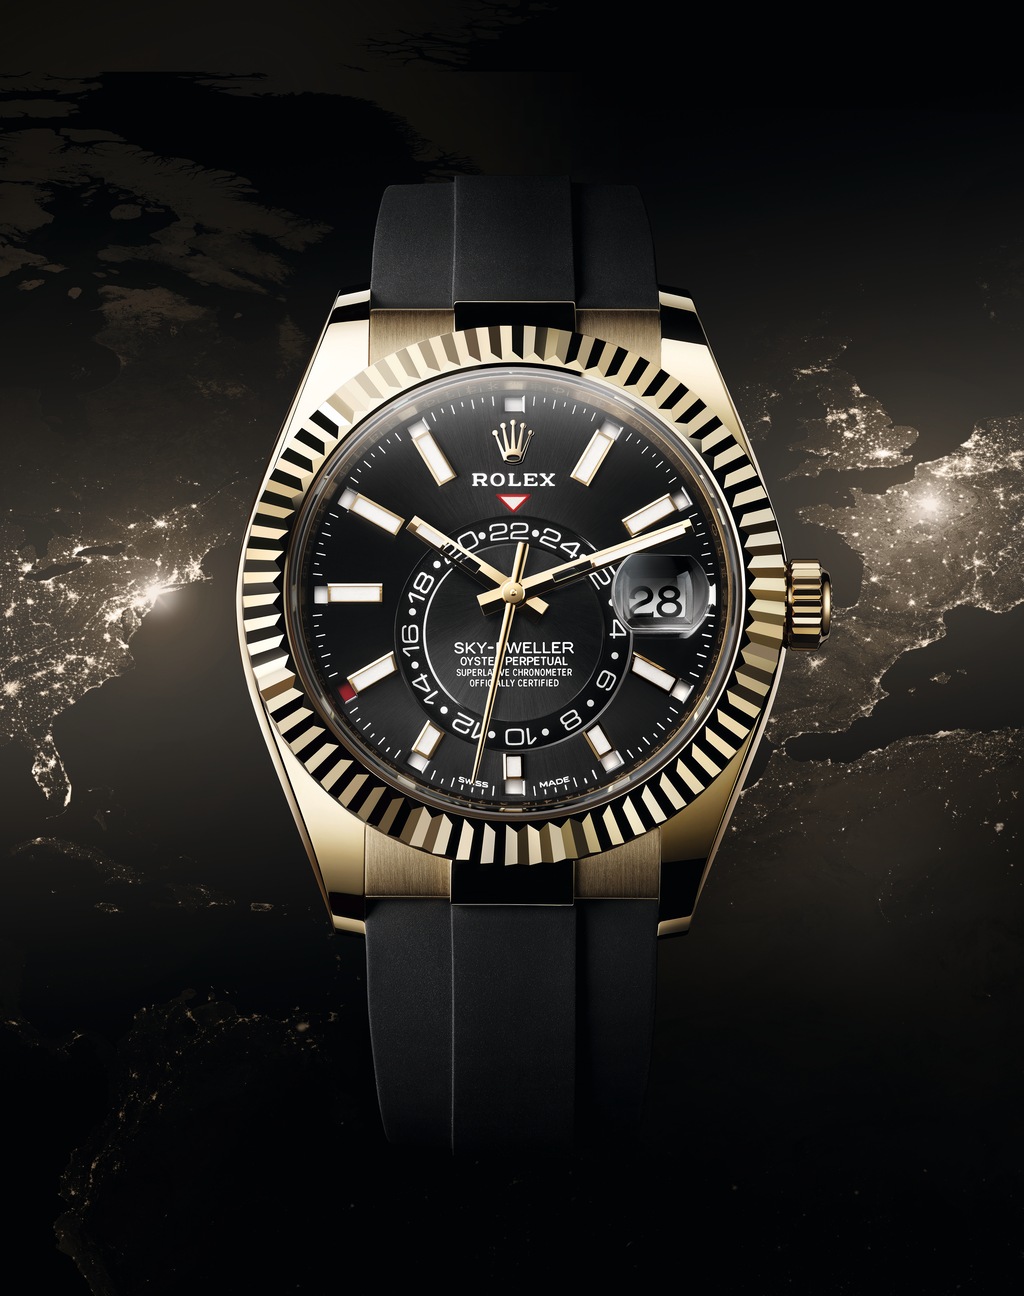 The Rolex Sky-Dweller is the Perfect Timepiece for Frequent Flyers